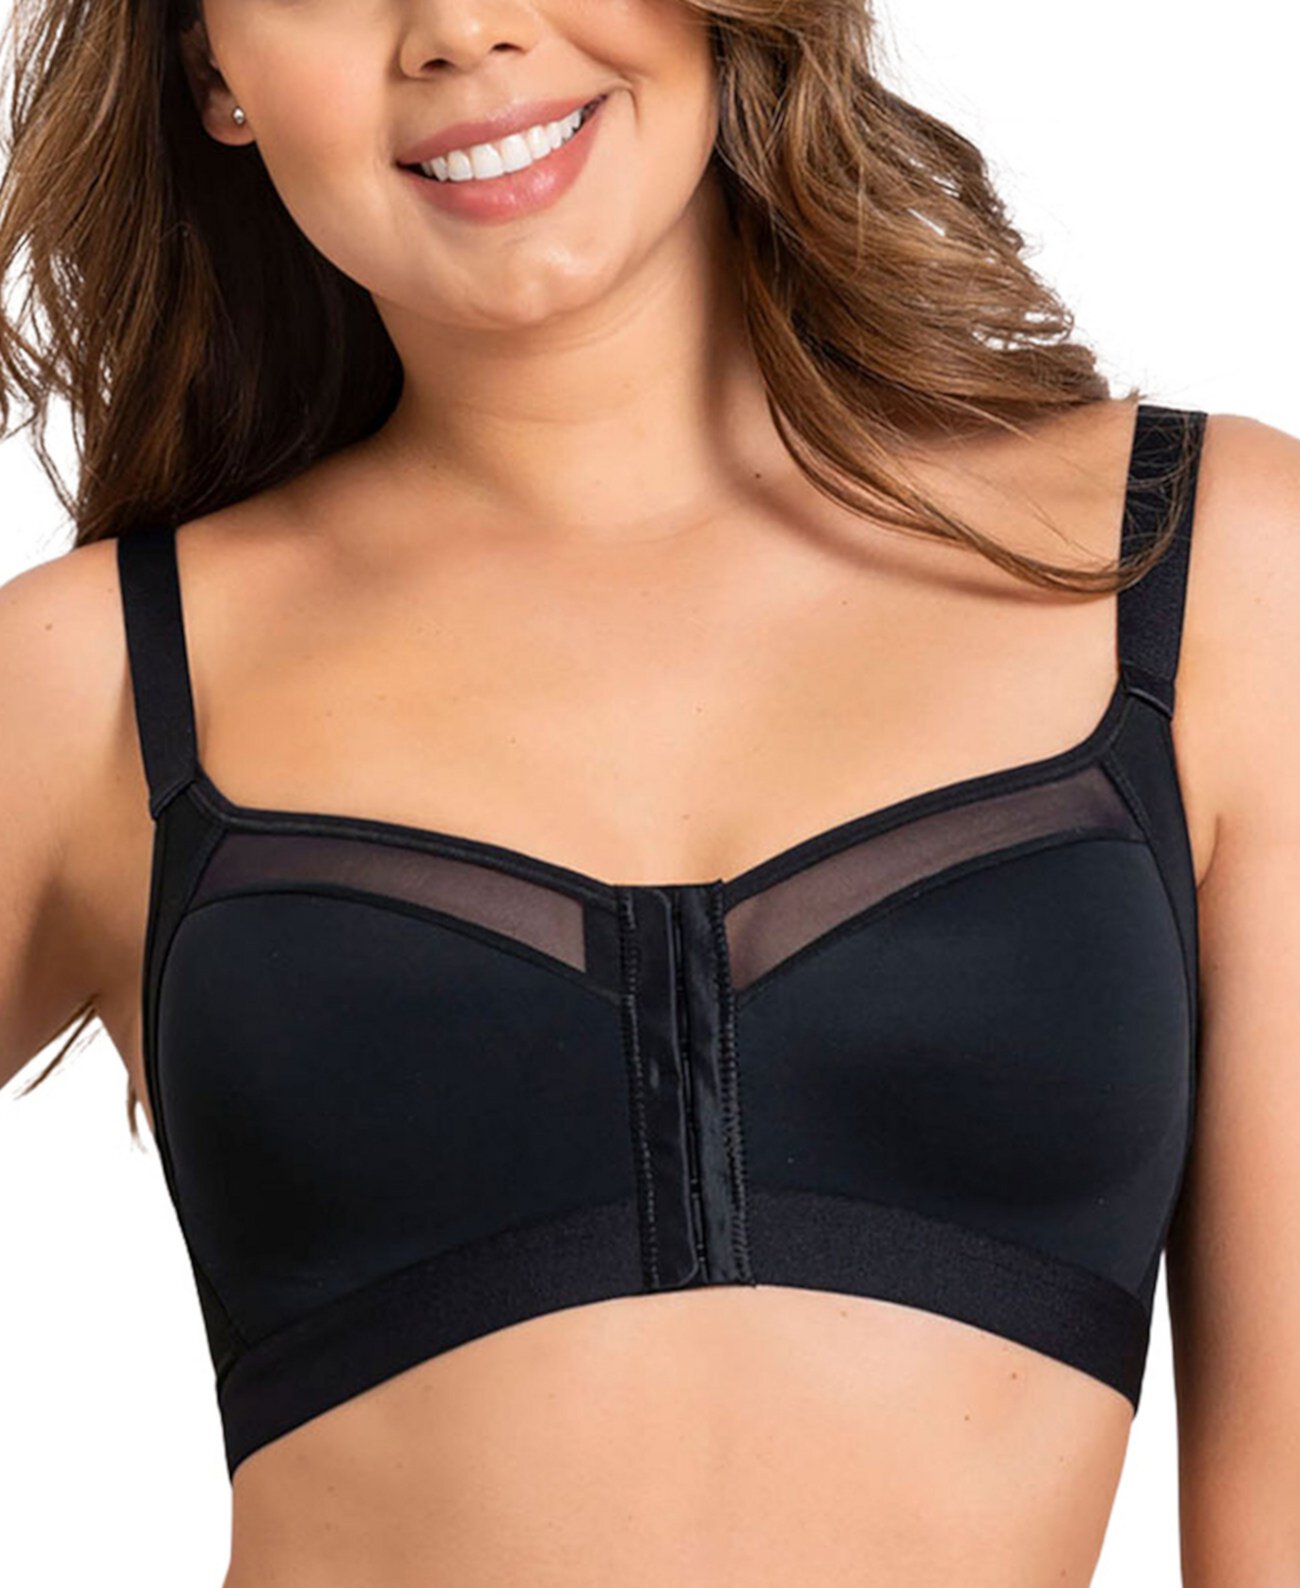 Leonisa Back Support Posture Corrector Wireless Bra with Contour Cups 011936